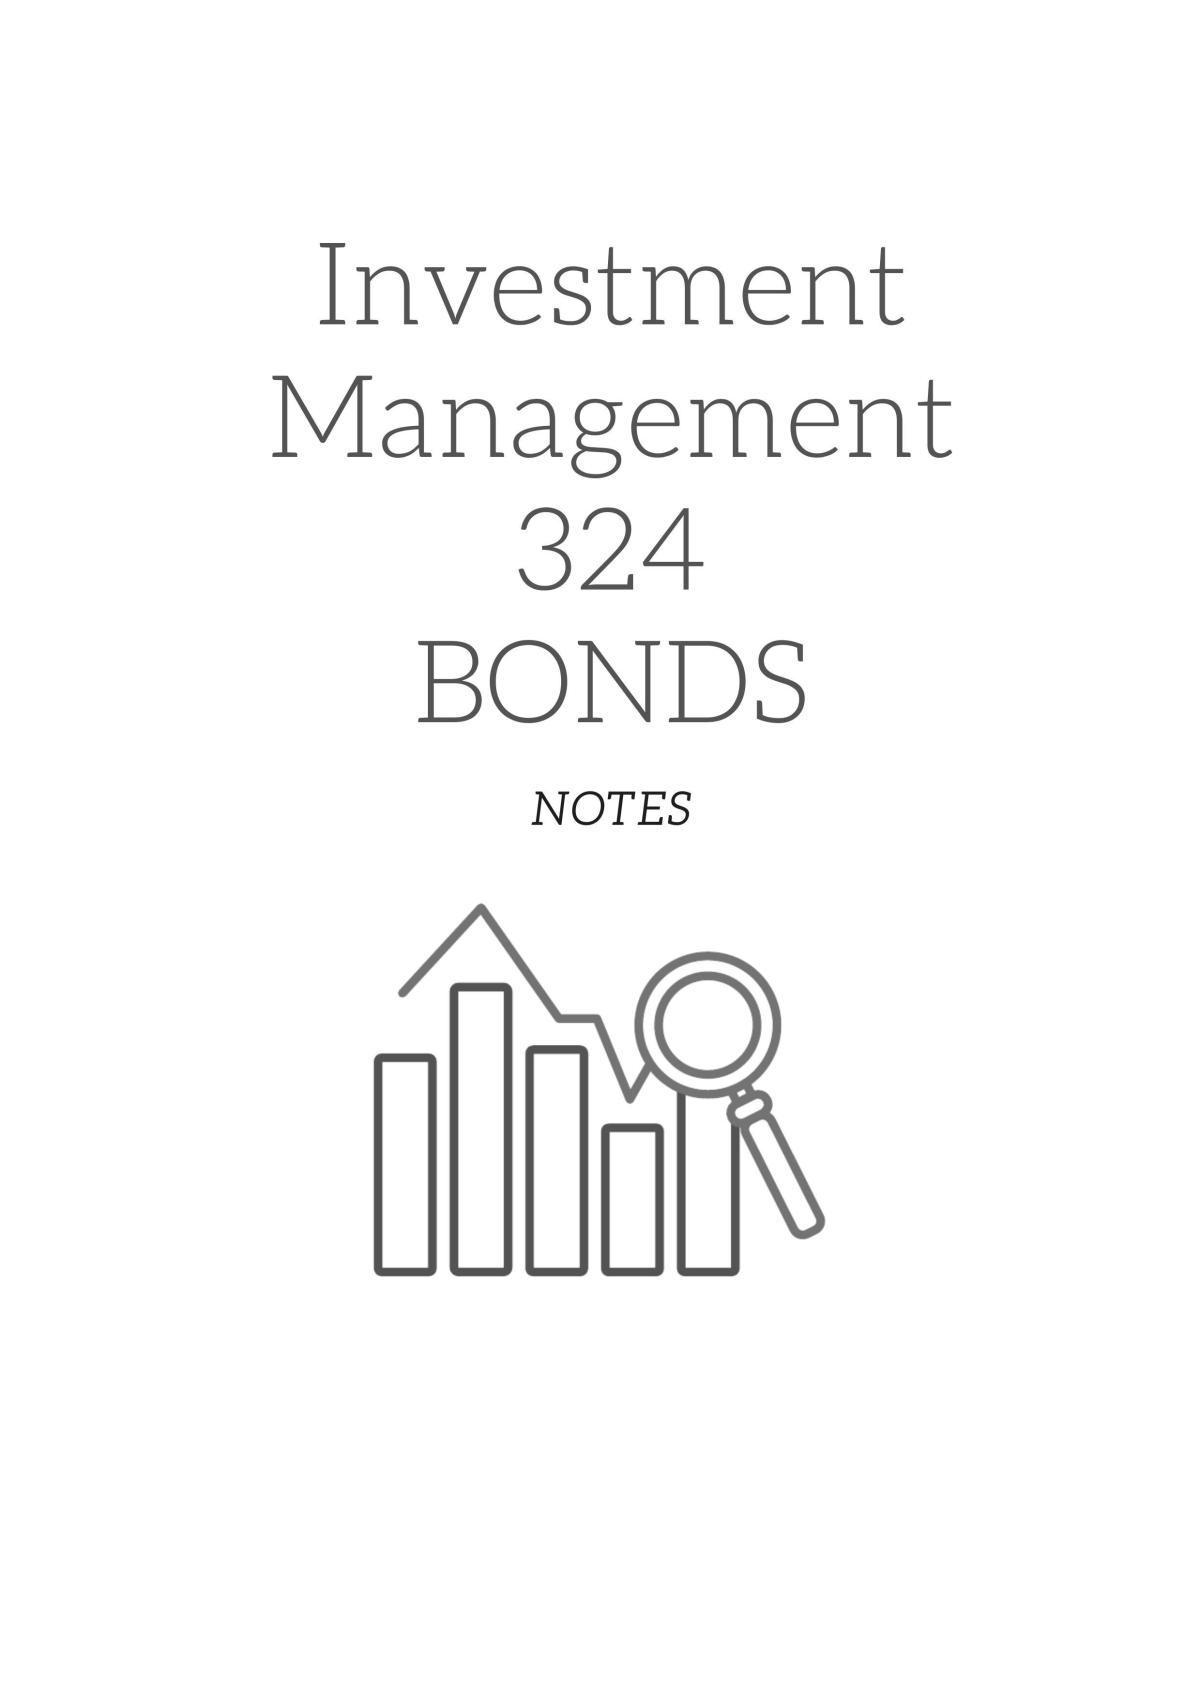 Notes for Investment Management - Page 1